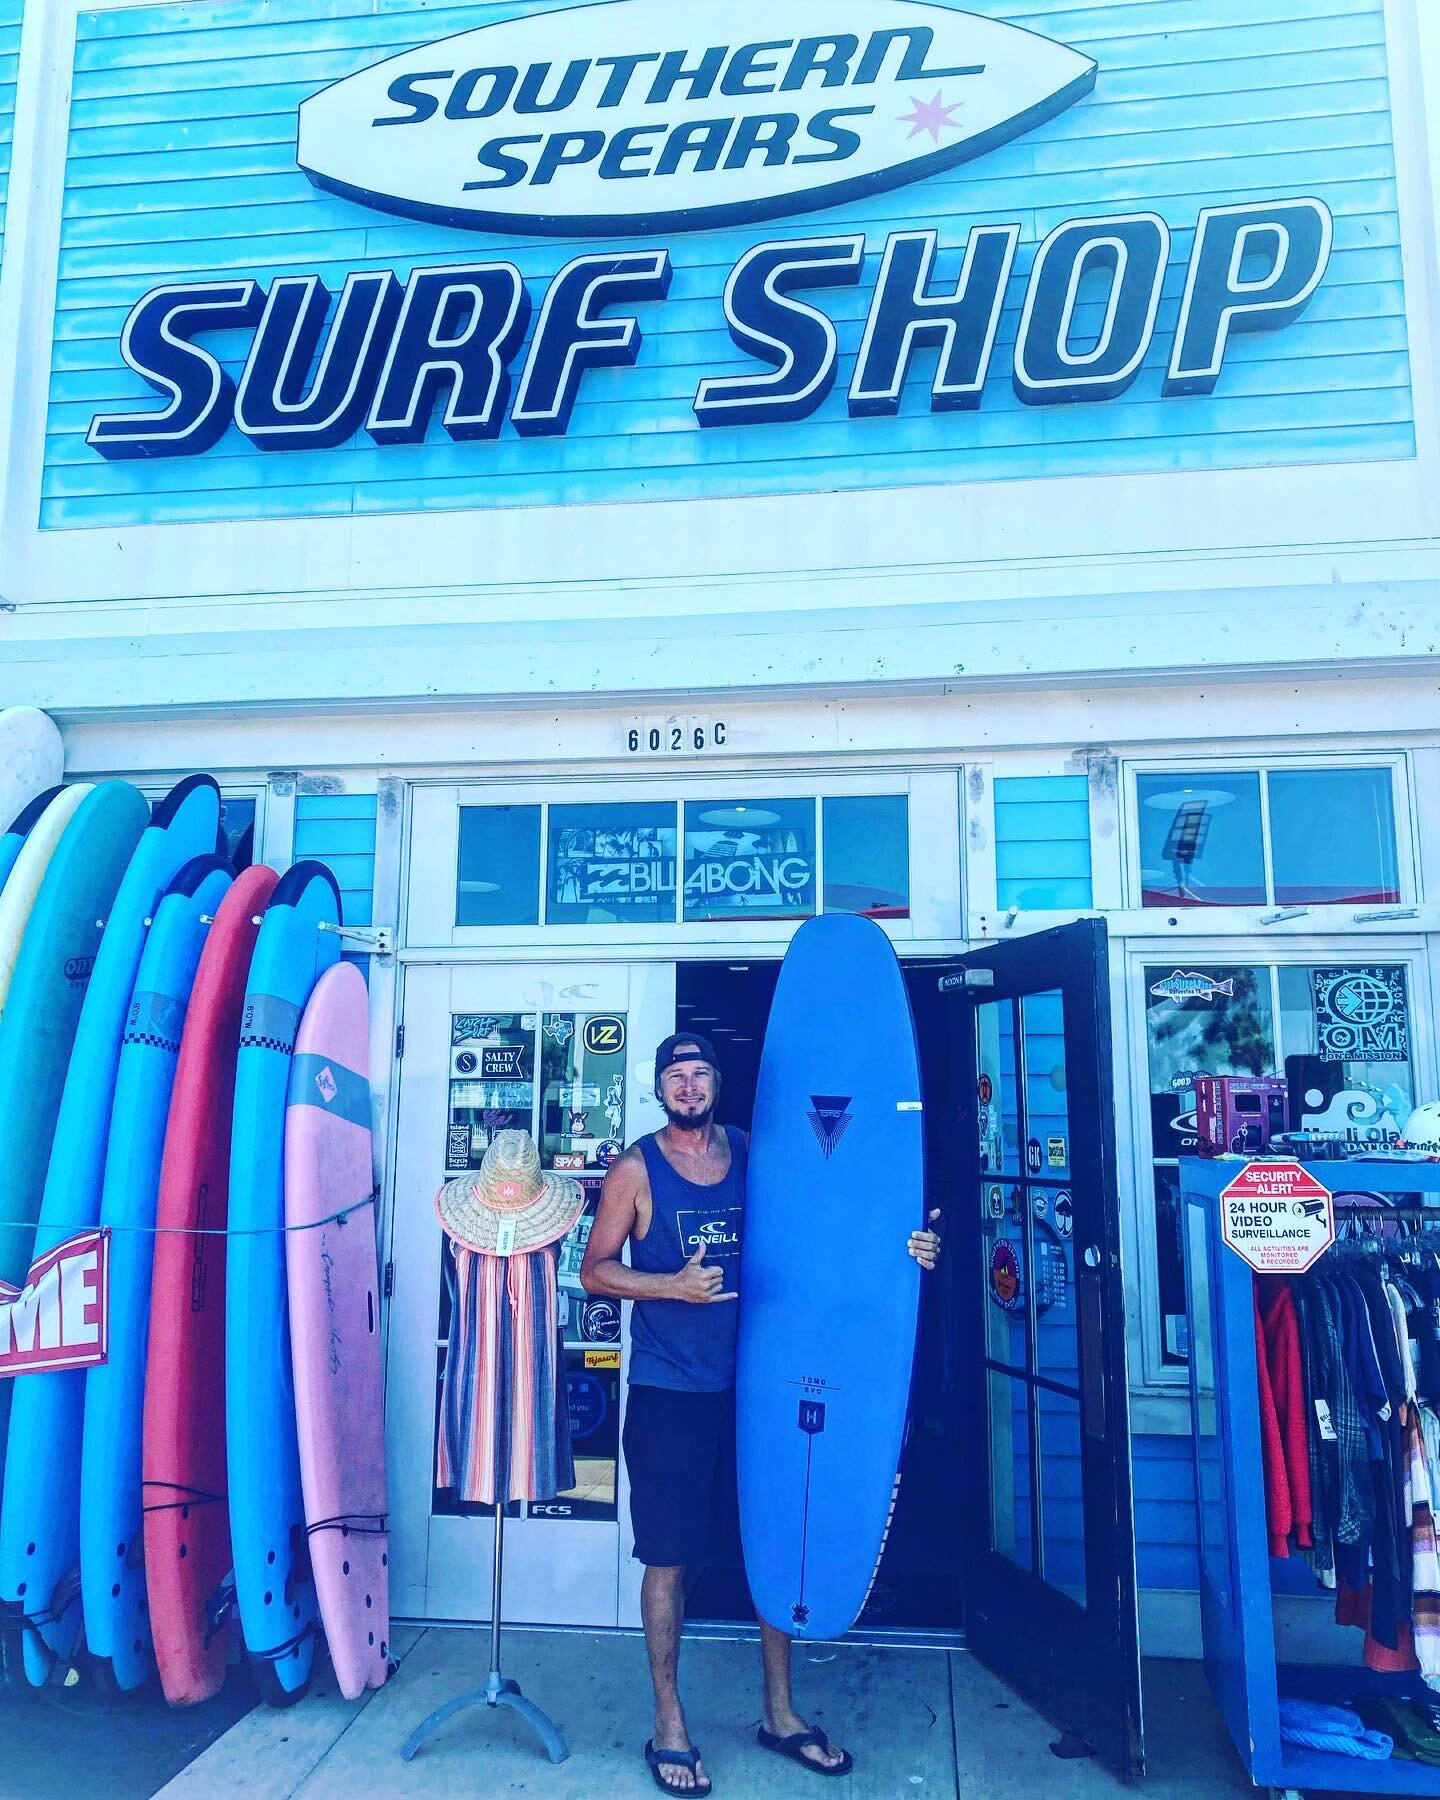 This beautiful 5&rsquo;9 Tomo Evo is off the market! So many have been eyeing this one, but Shane snagged it today. Happy New Board Day!🤙🏼
Stop by &amp; check us out!
🤙🏼👀

We are located at:
6026 Seawall Blvd.
Shop C, Galveston, TX 77551

📞Call